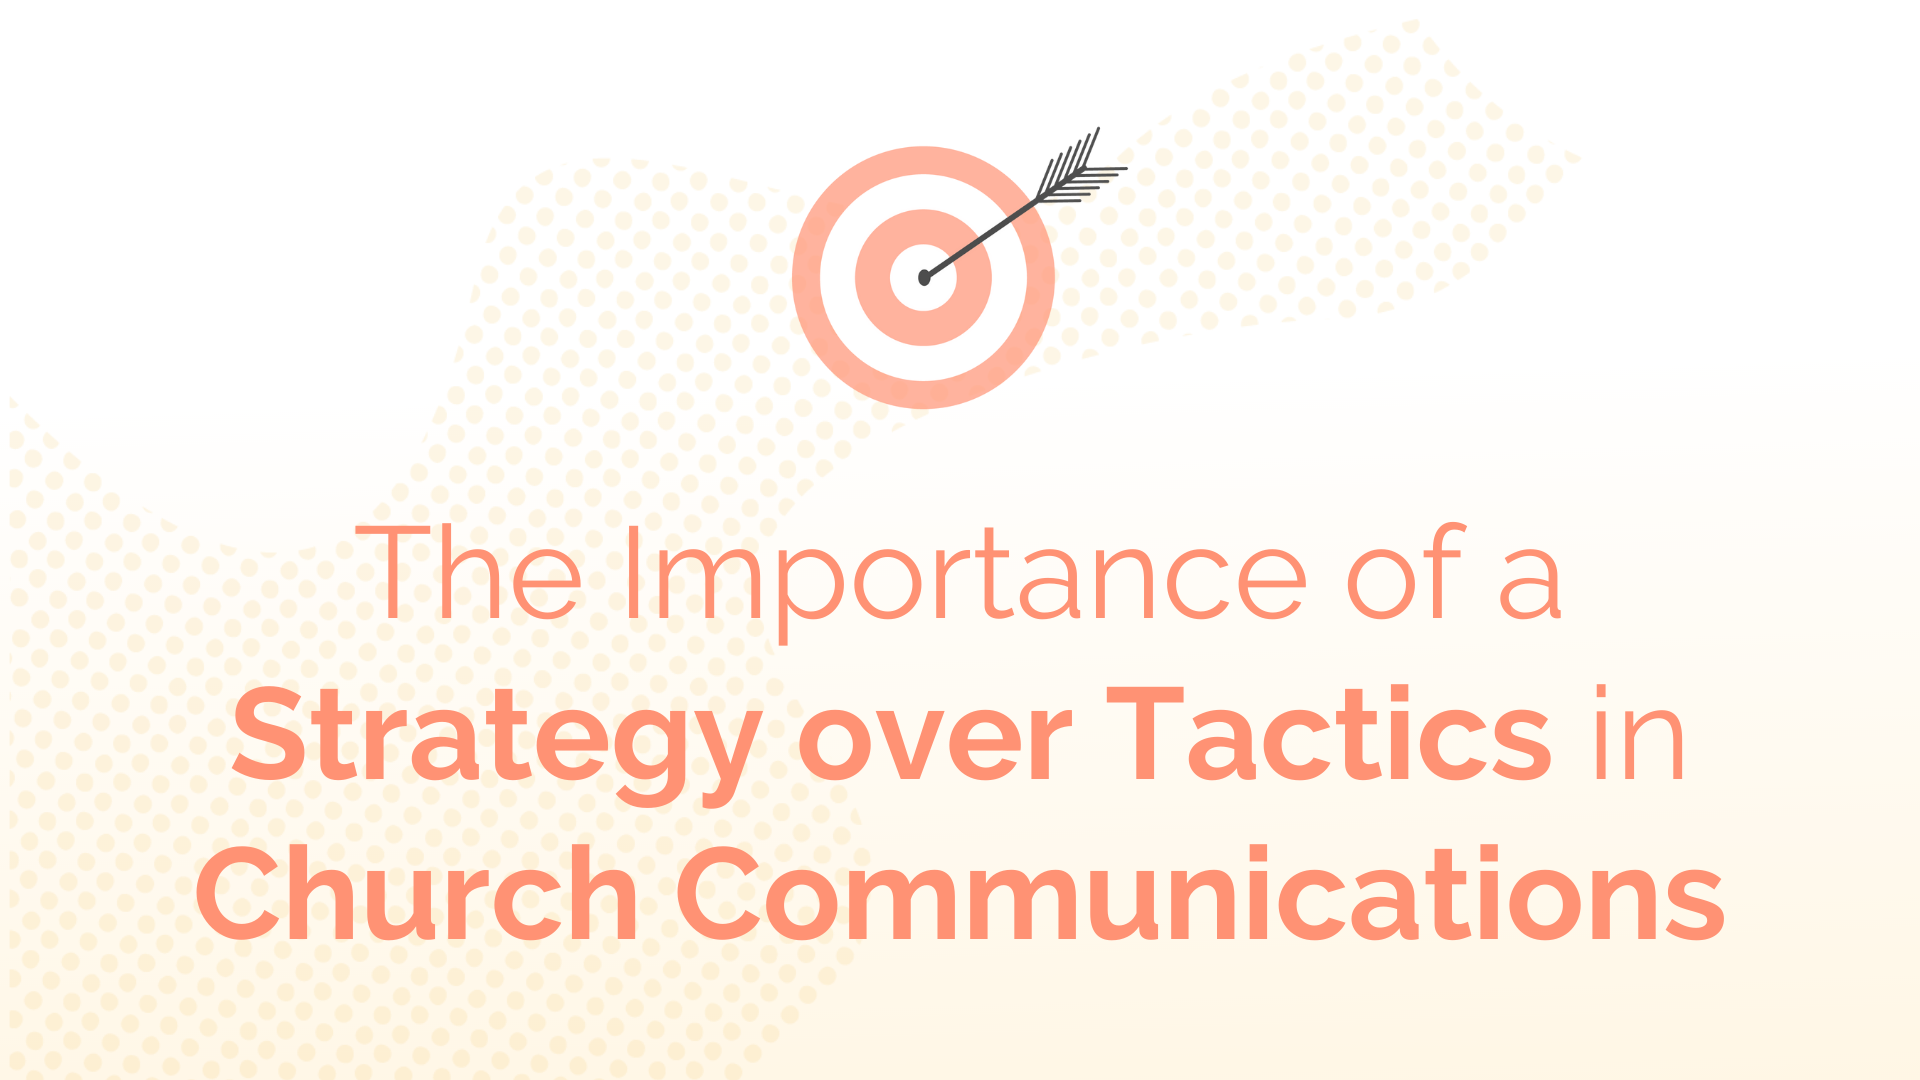 The Importance of a Strategy over Tactics in Church Communications